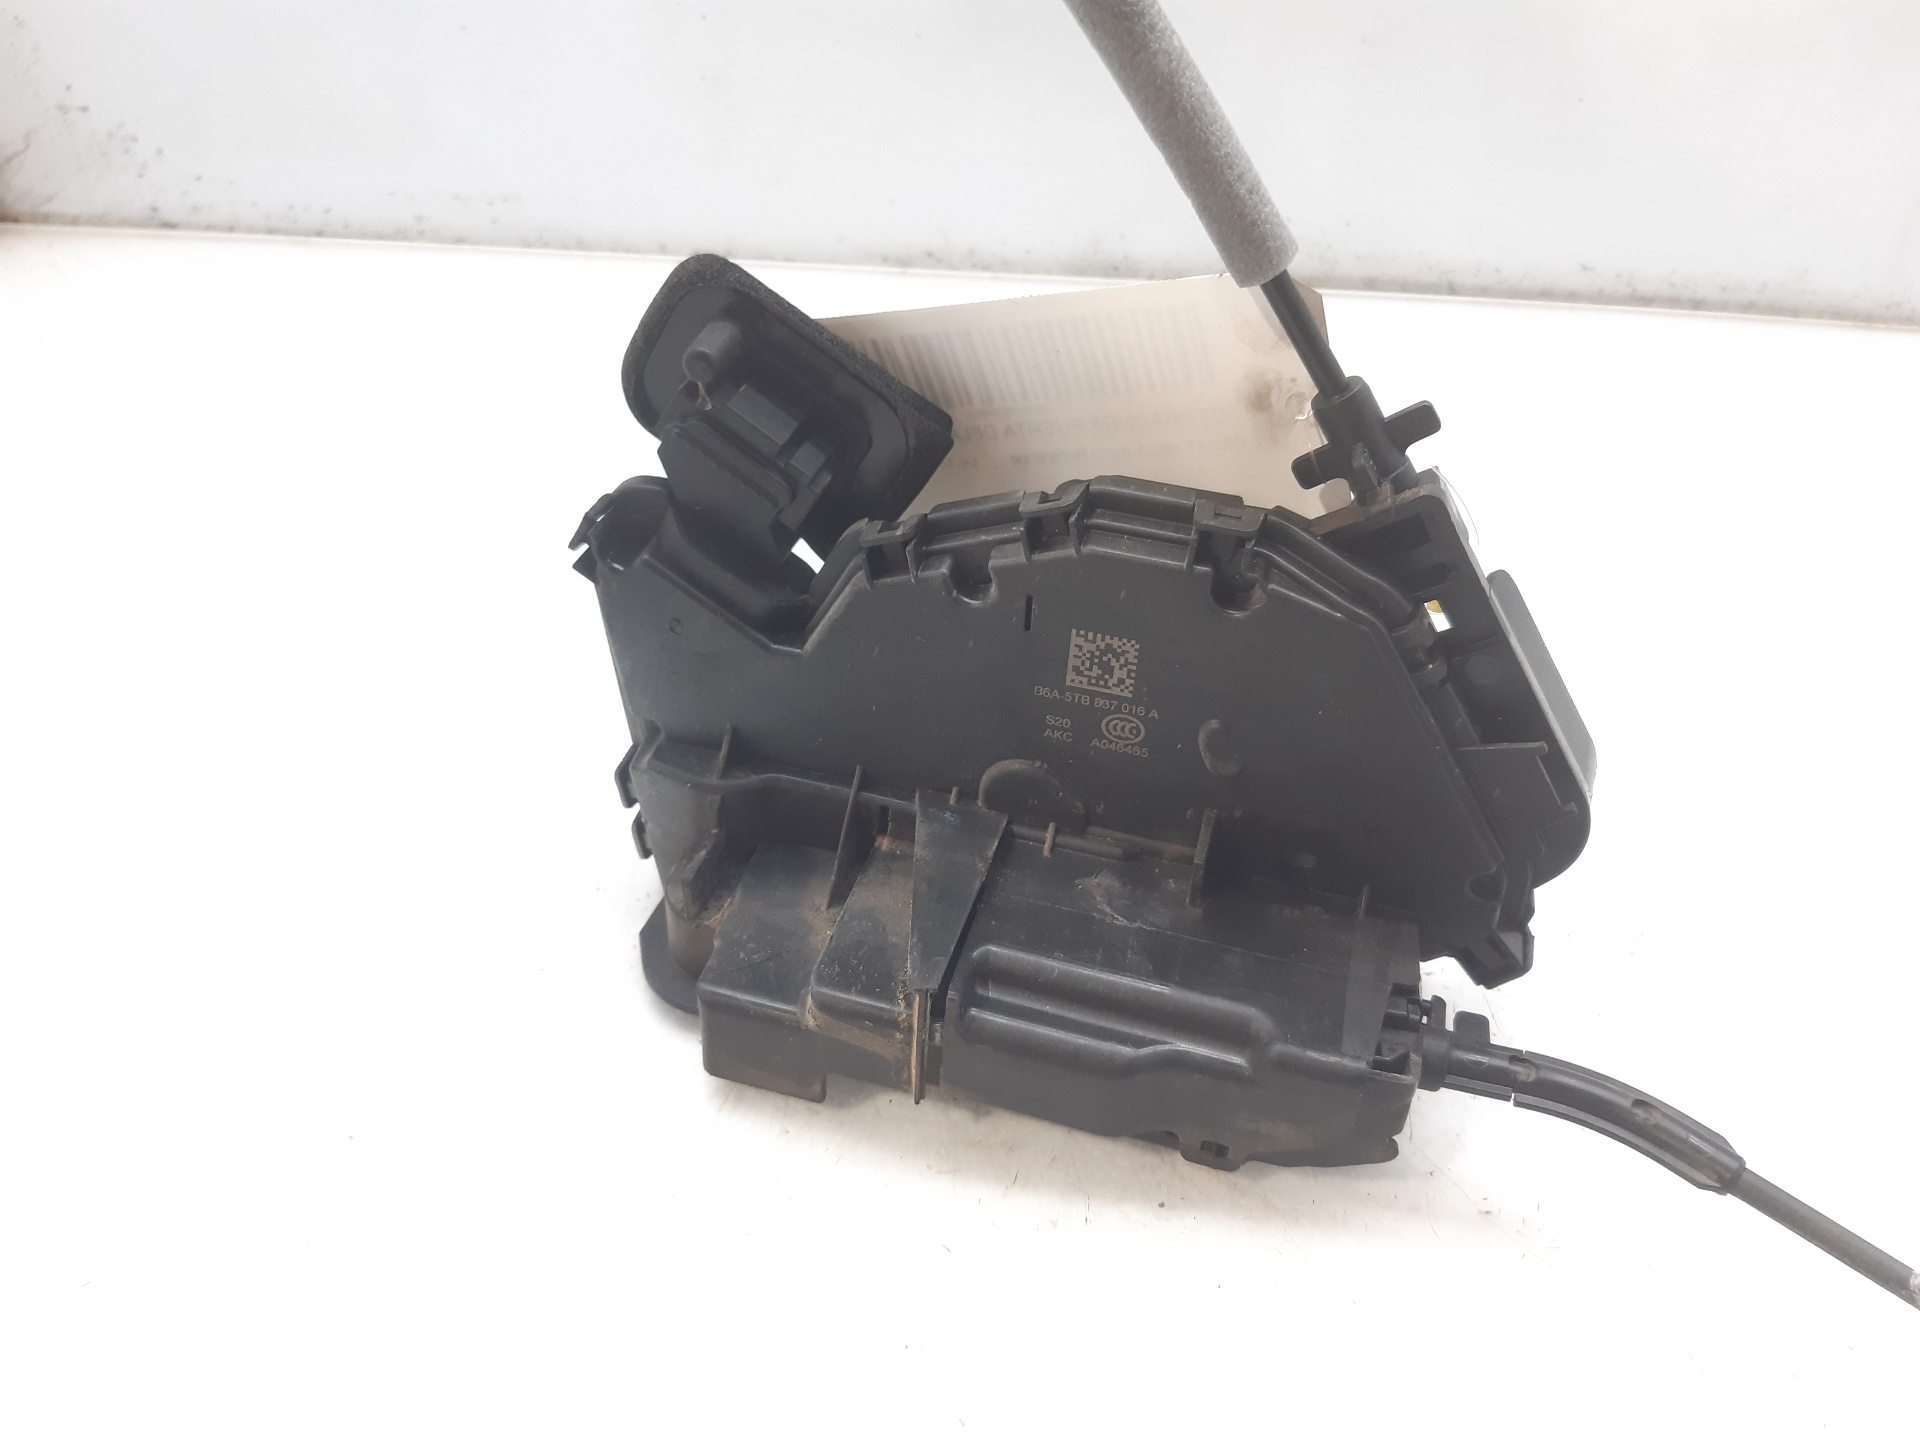 SEAT Alhambra 2 generation (2010-2021) Front Right Door Lock B6A5TB837016A 18794946